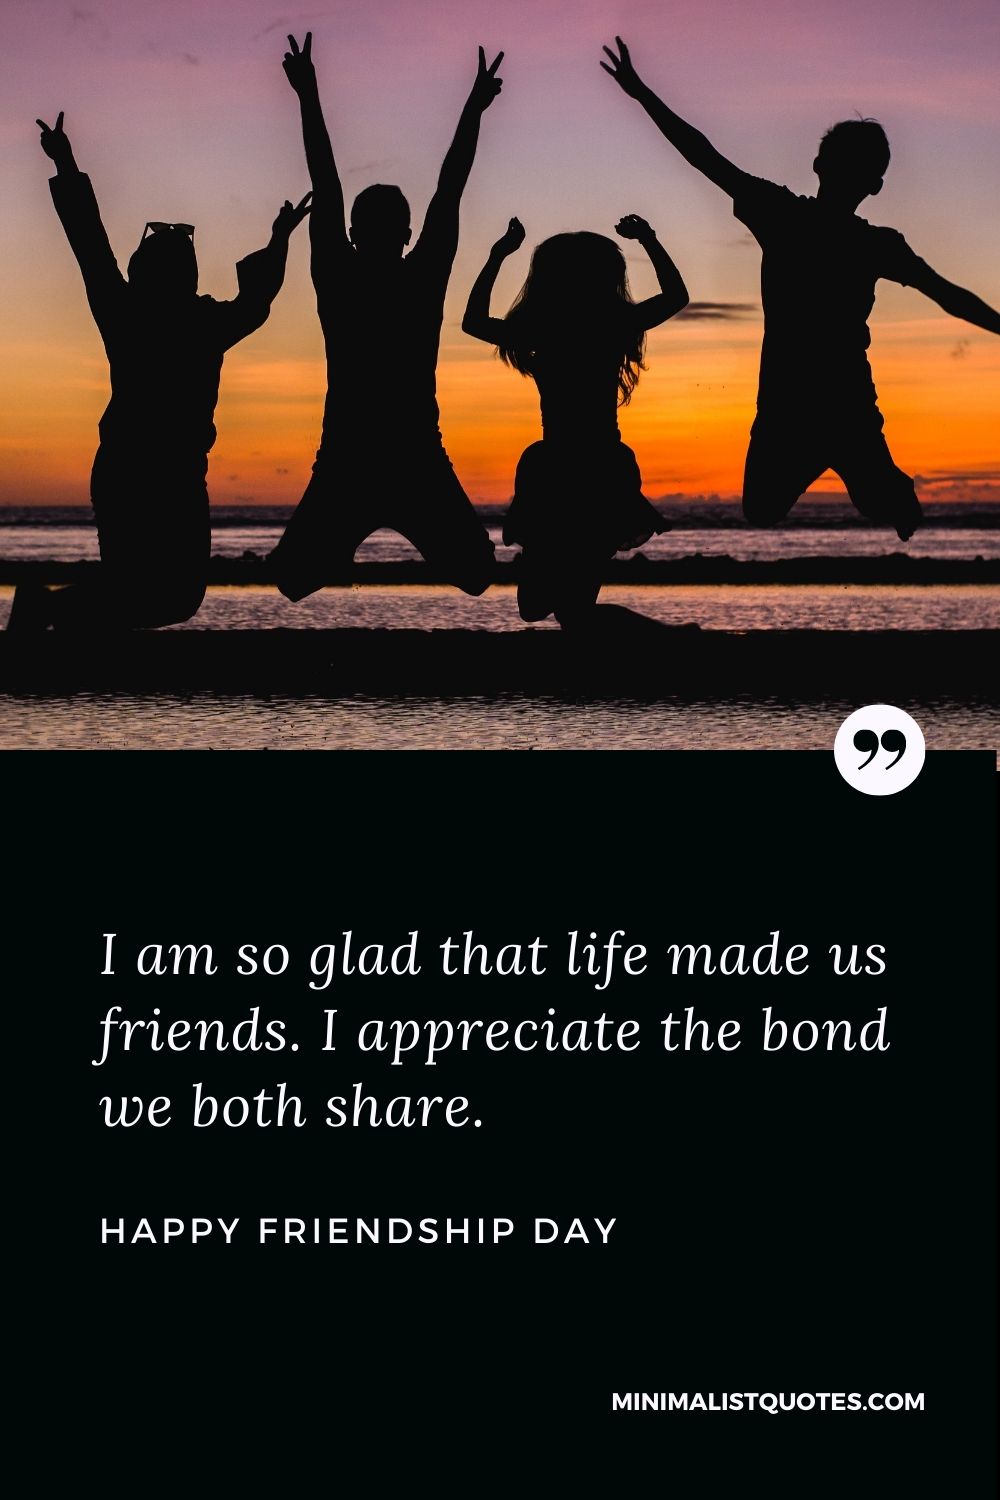 I Am So Glad That Life Made Us Friends I Appreciate The Bond We Both Share Happy Friendship Day